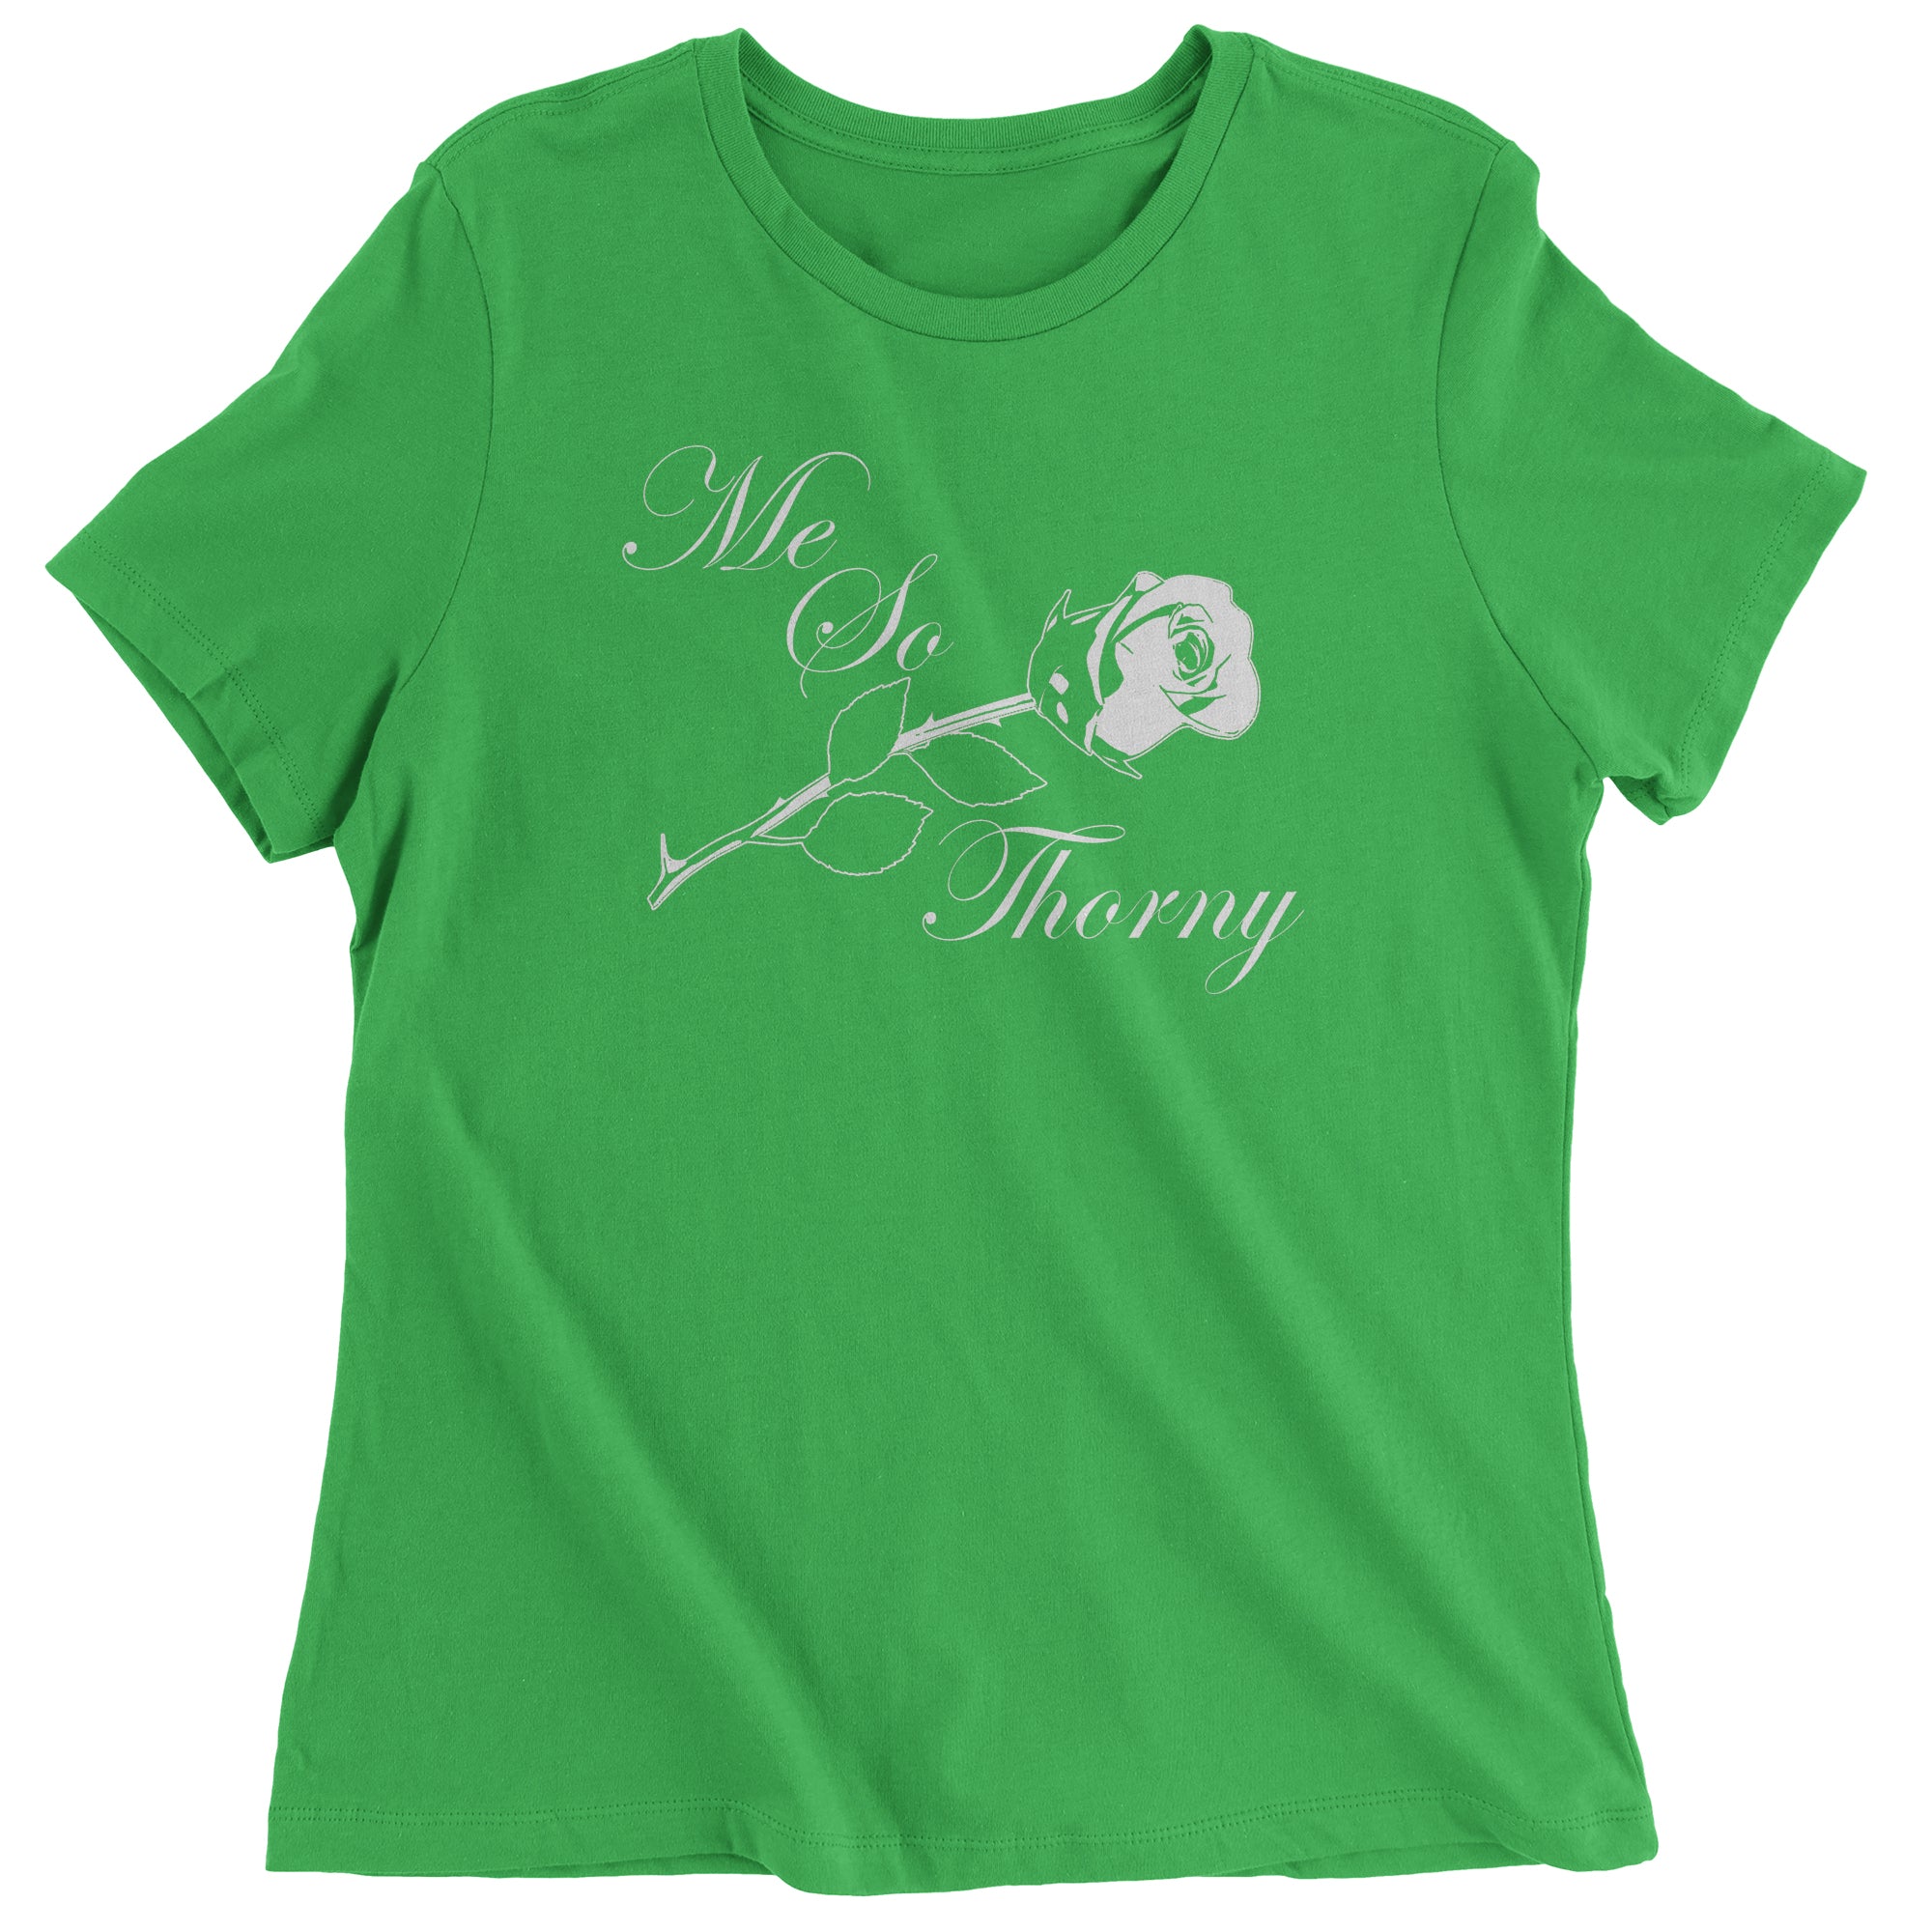 Me So Thorny Funny Romance and Valentine's Day Women's T-Shirt